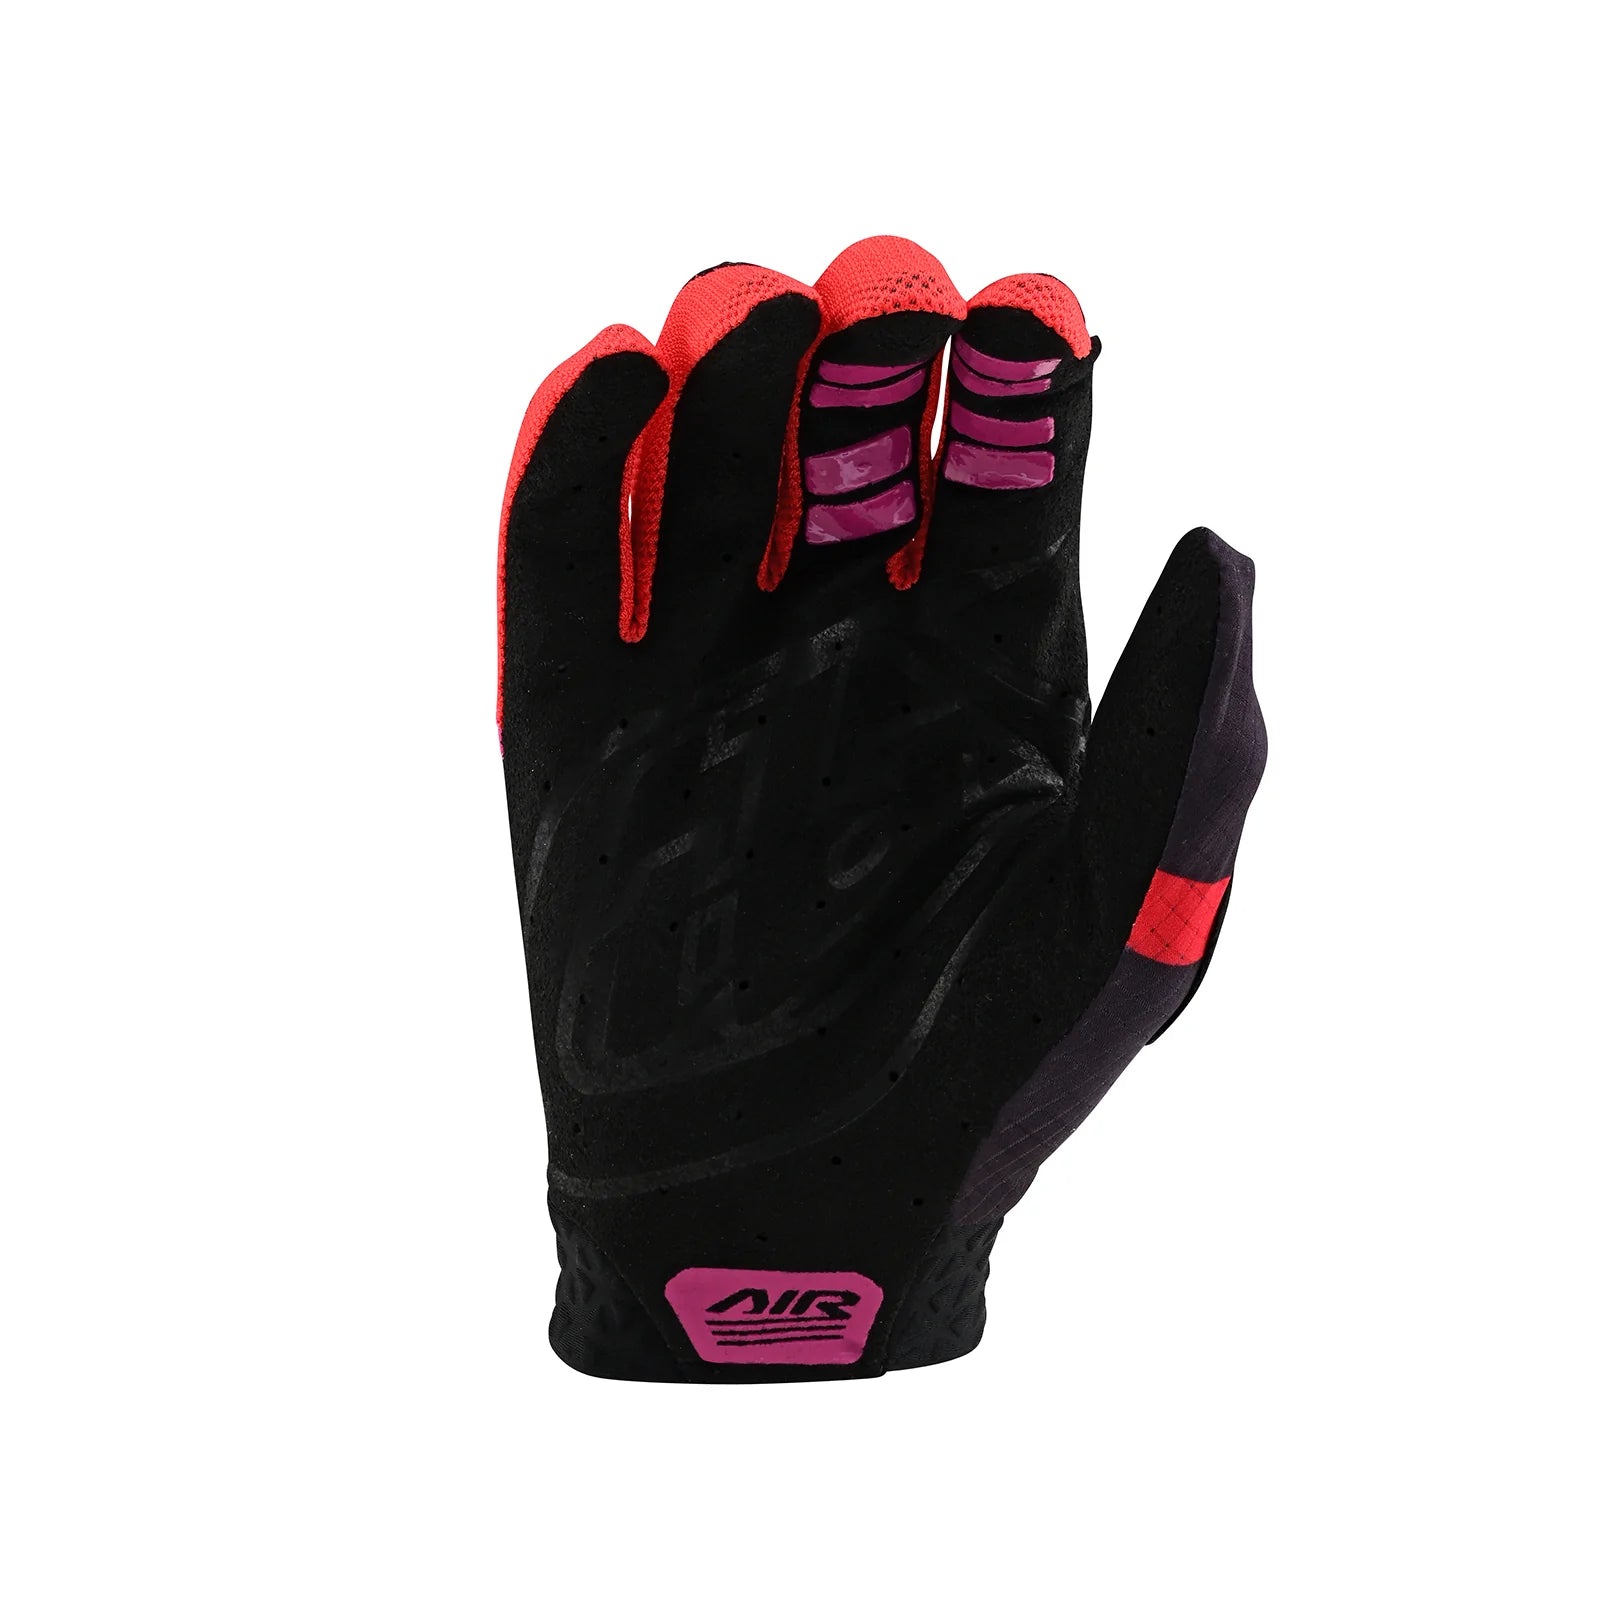 Black and pink full-finger TLD Air Glove Pinned Black cycling glove with single-layer perforated palm padding.